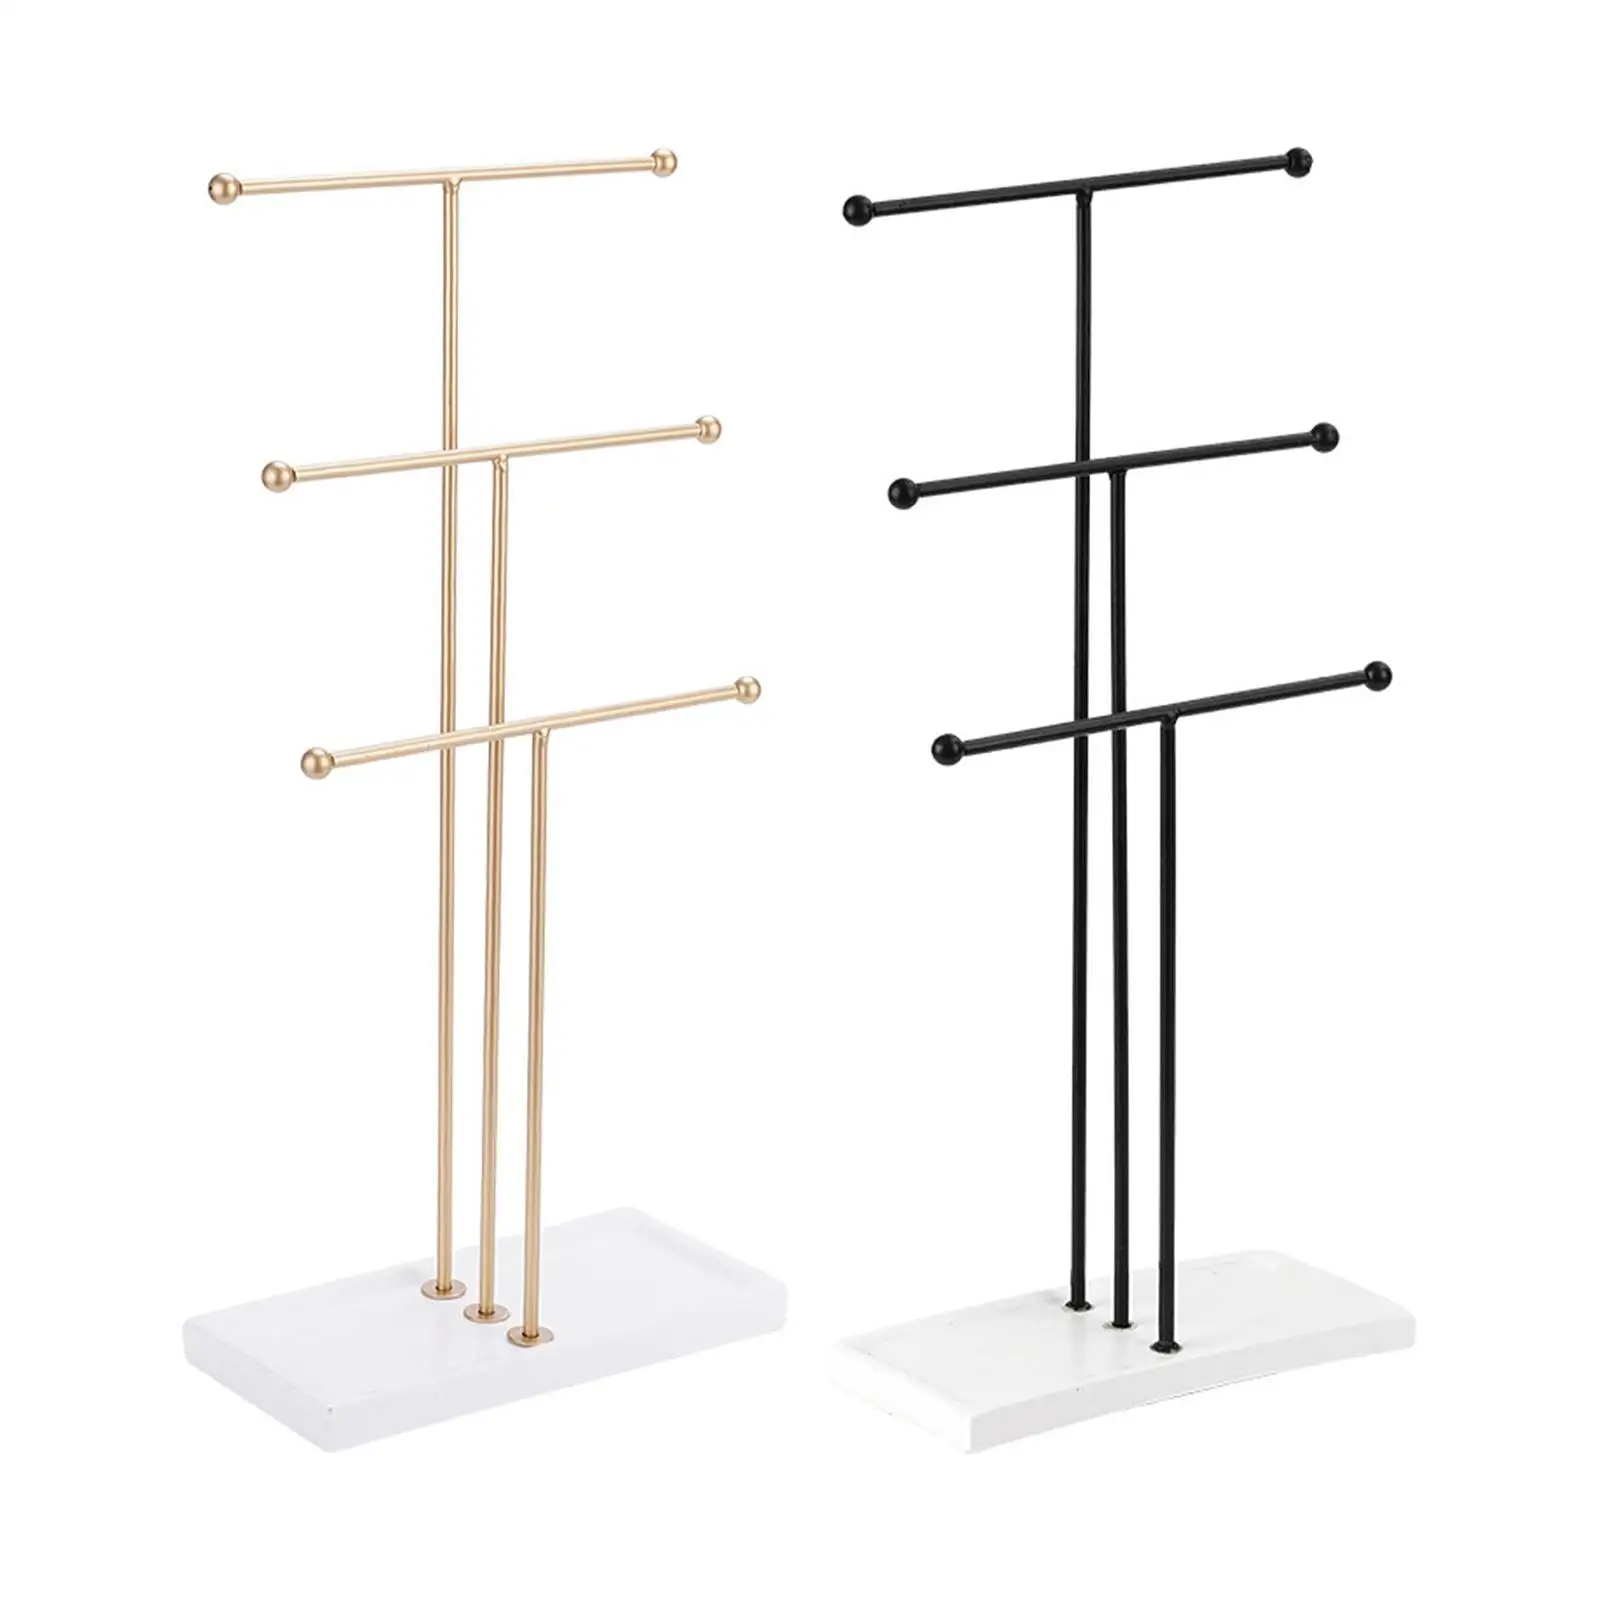 Table Top 3 Tiered Bars Necklace Display Stand, for Displaying, Storing and Organizing Necklace Holder with Resin Base